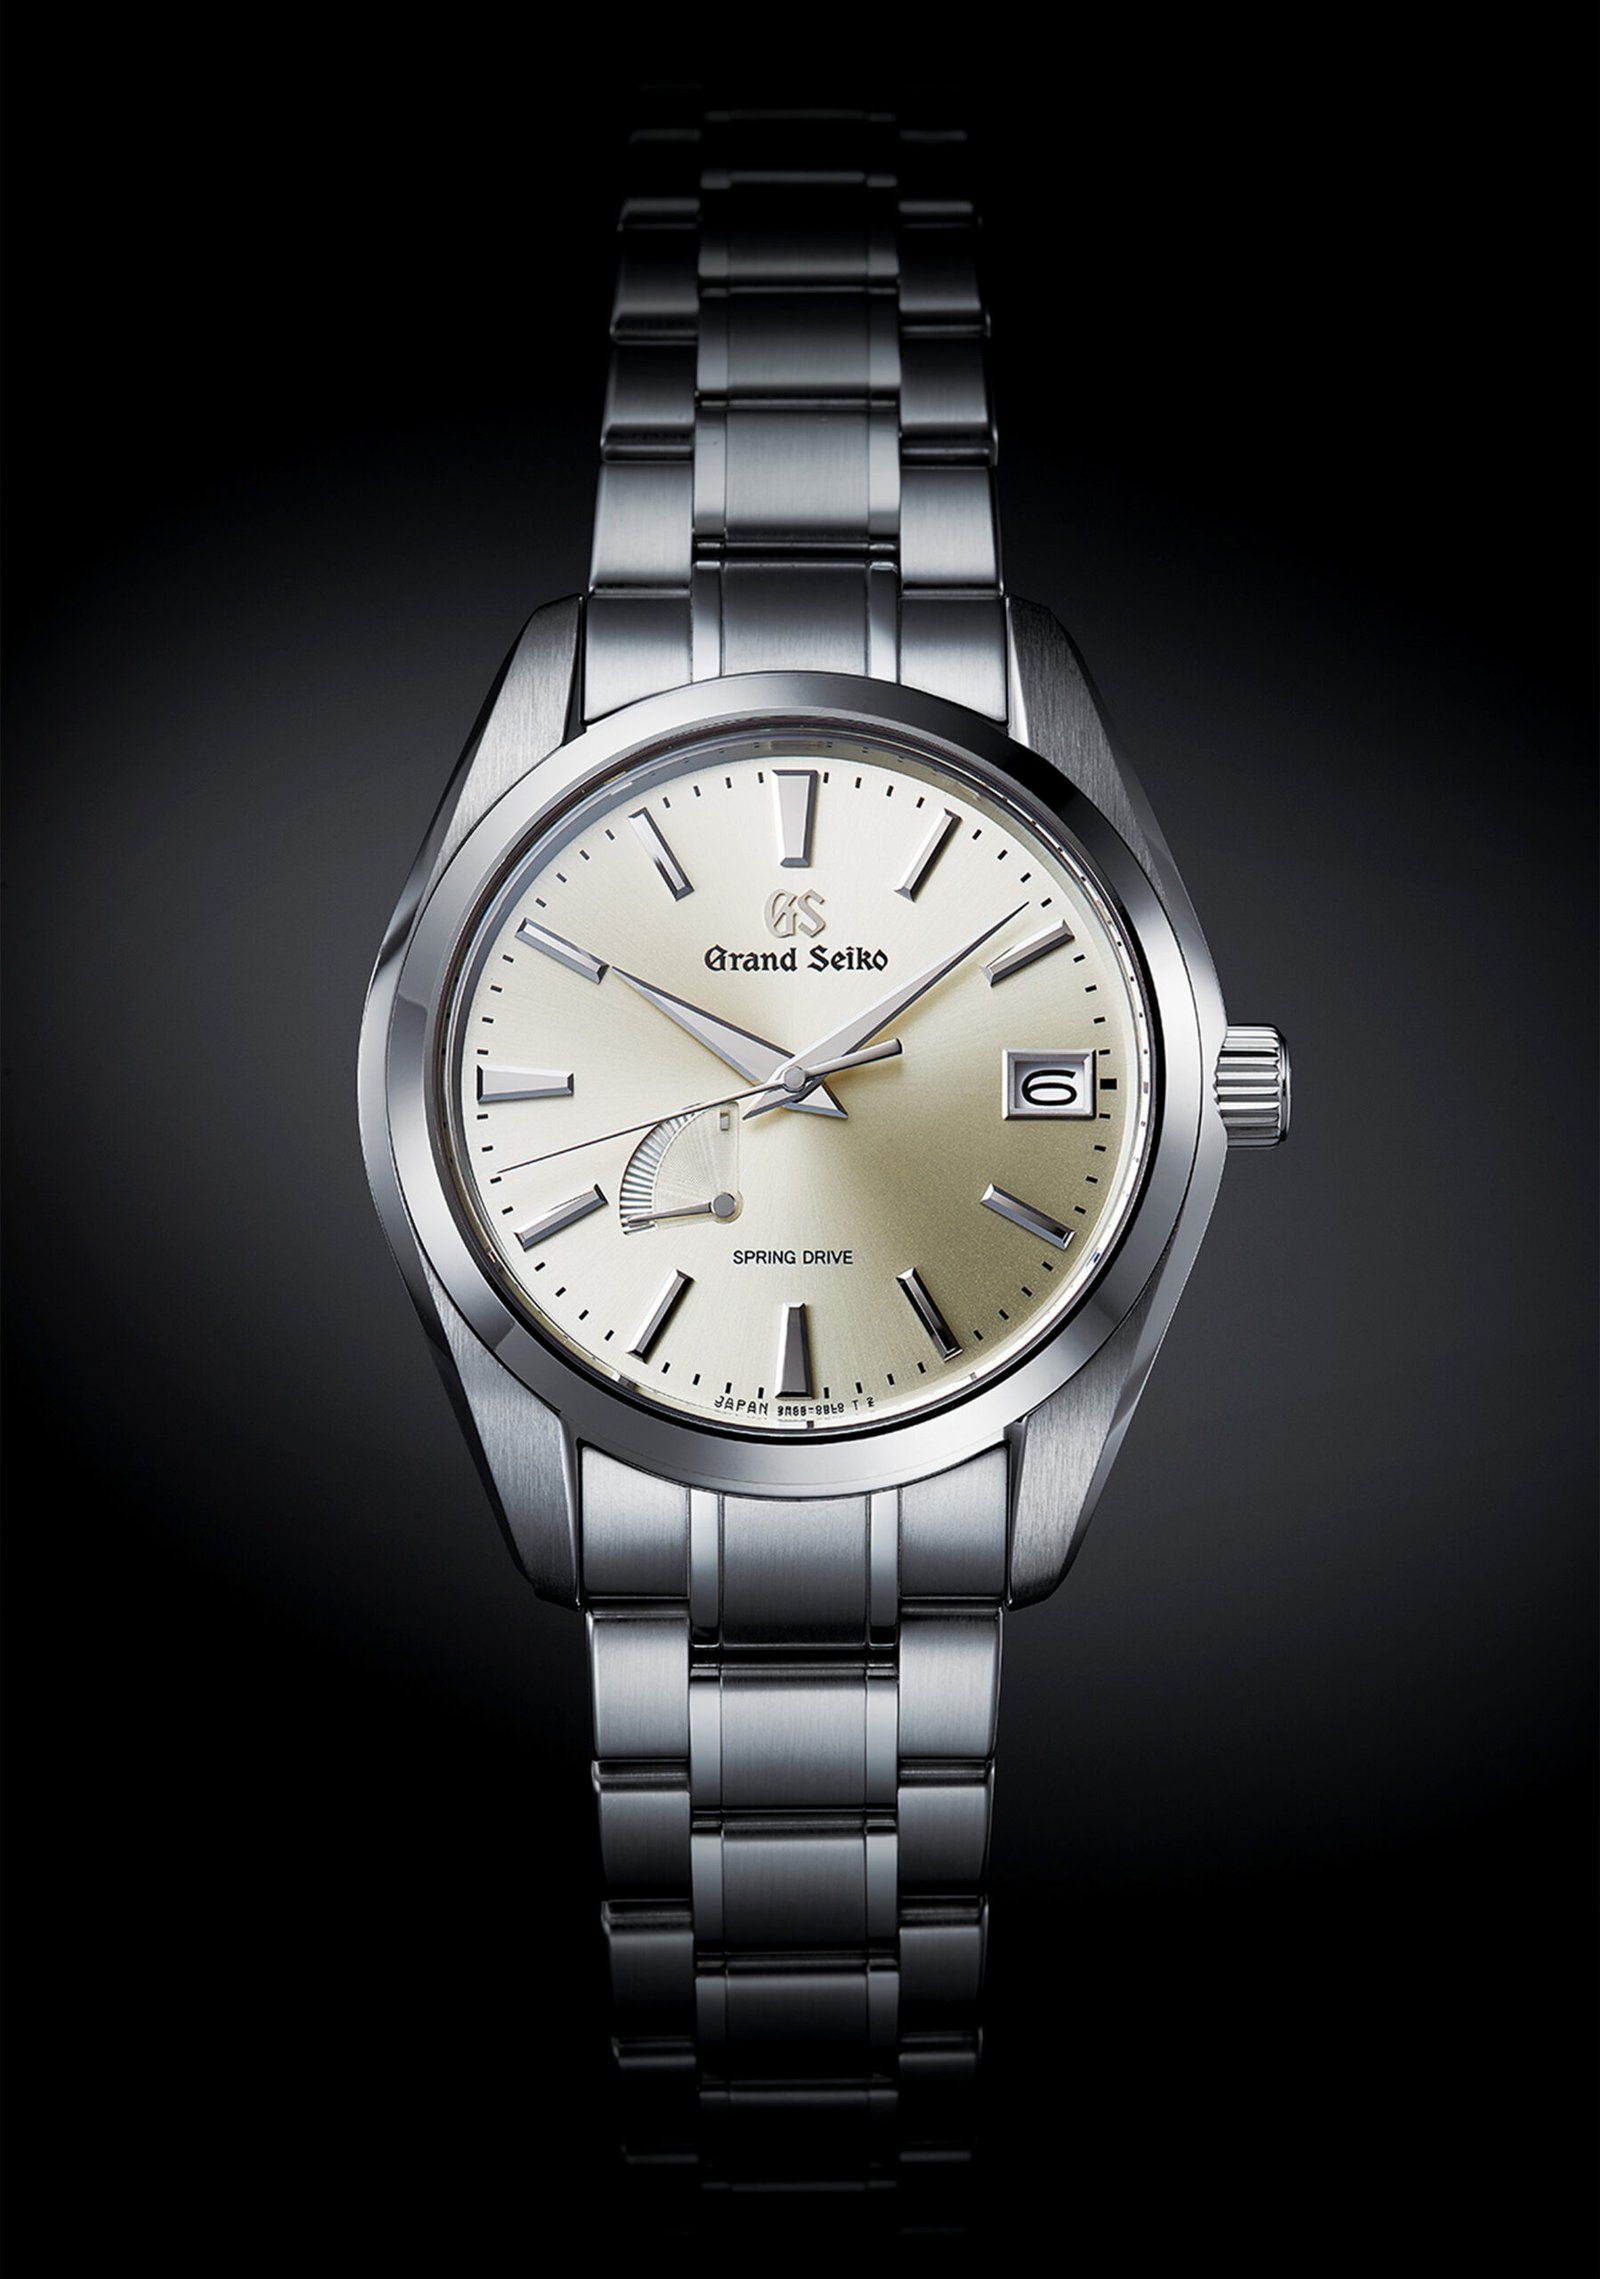 Grand Seiko SBGA201 - The first Grand Seiko Spring Drive watch with caliber 9R65 released in 2004 with a power reserve indicator at 7 o’clock and a power reserve of 72 hours. A 41.0 automatic with a precision of one second a day. This classic Grand Seiko design was reborn in 2017 with the Grand Seiko name at the twelve o’clock position.